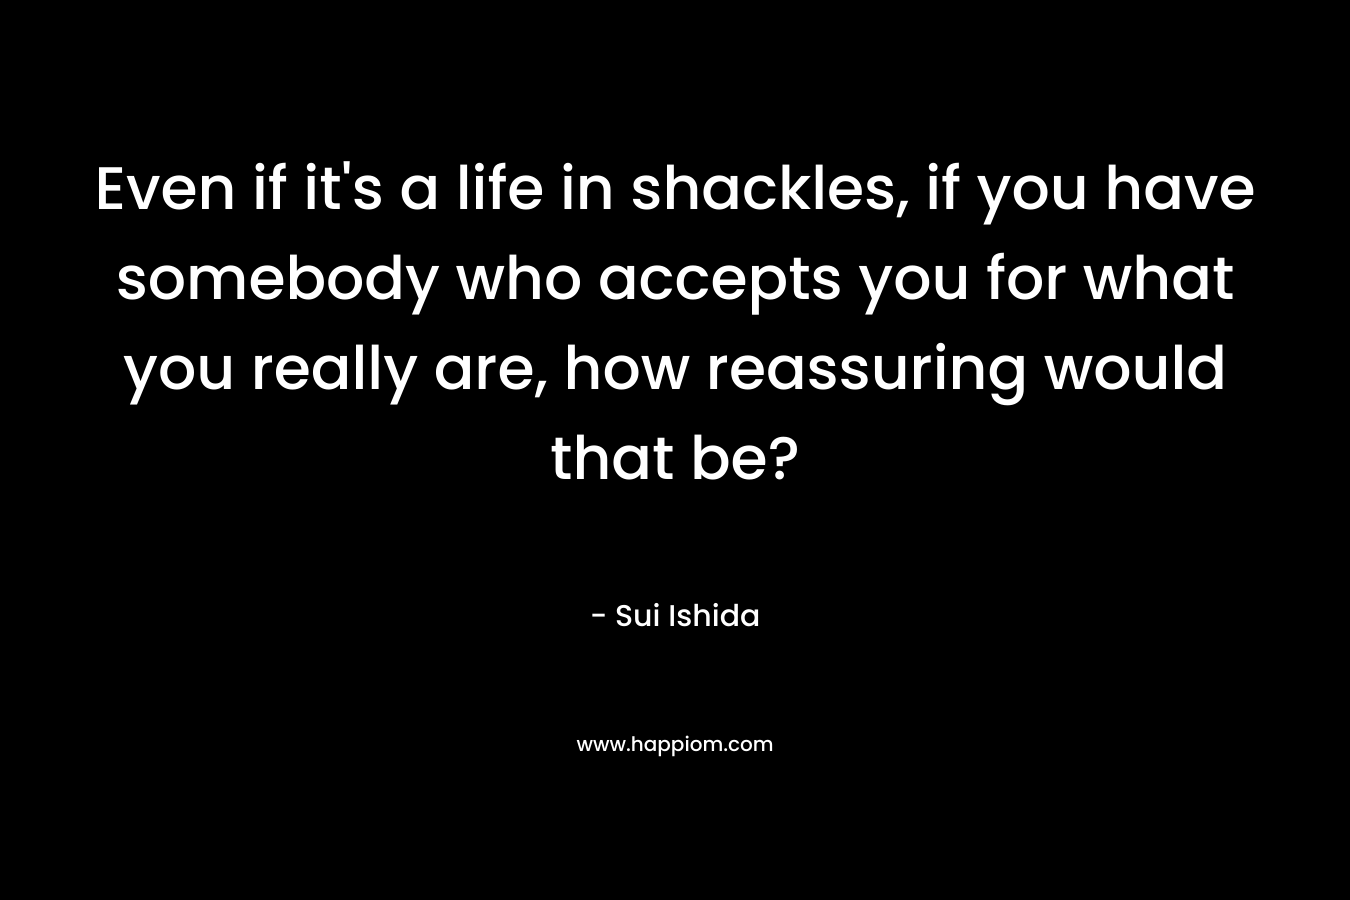 Even if it's a life in shackles, if you have somebody who accepts you for what you really are, how reassuring would that be?